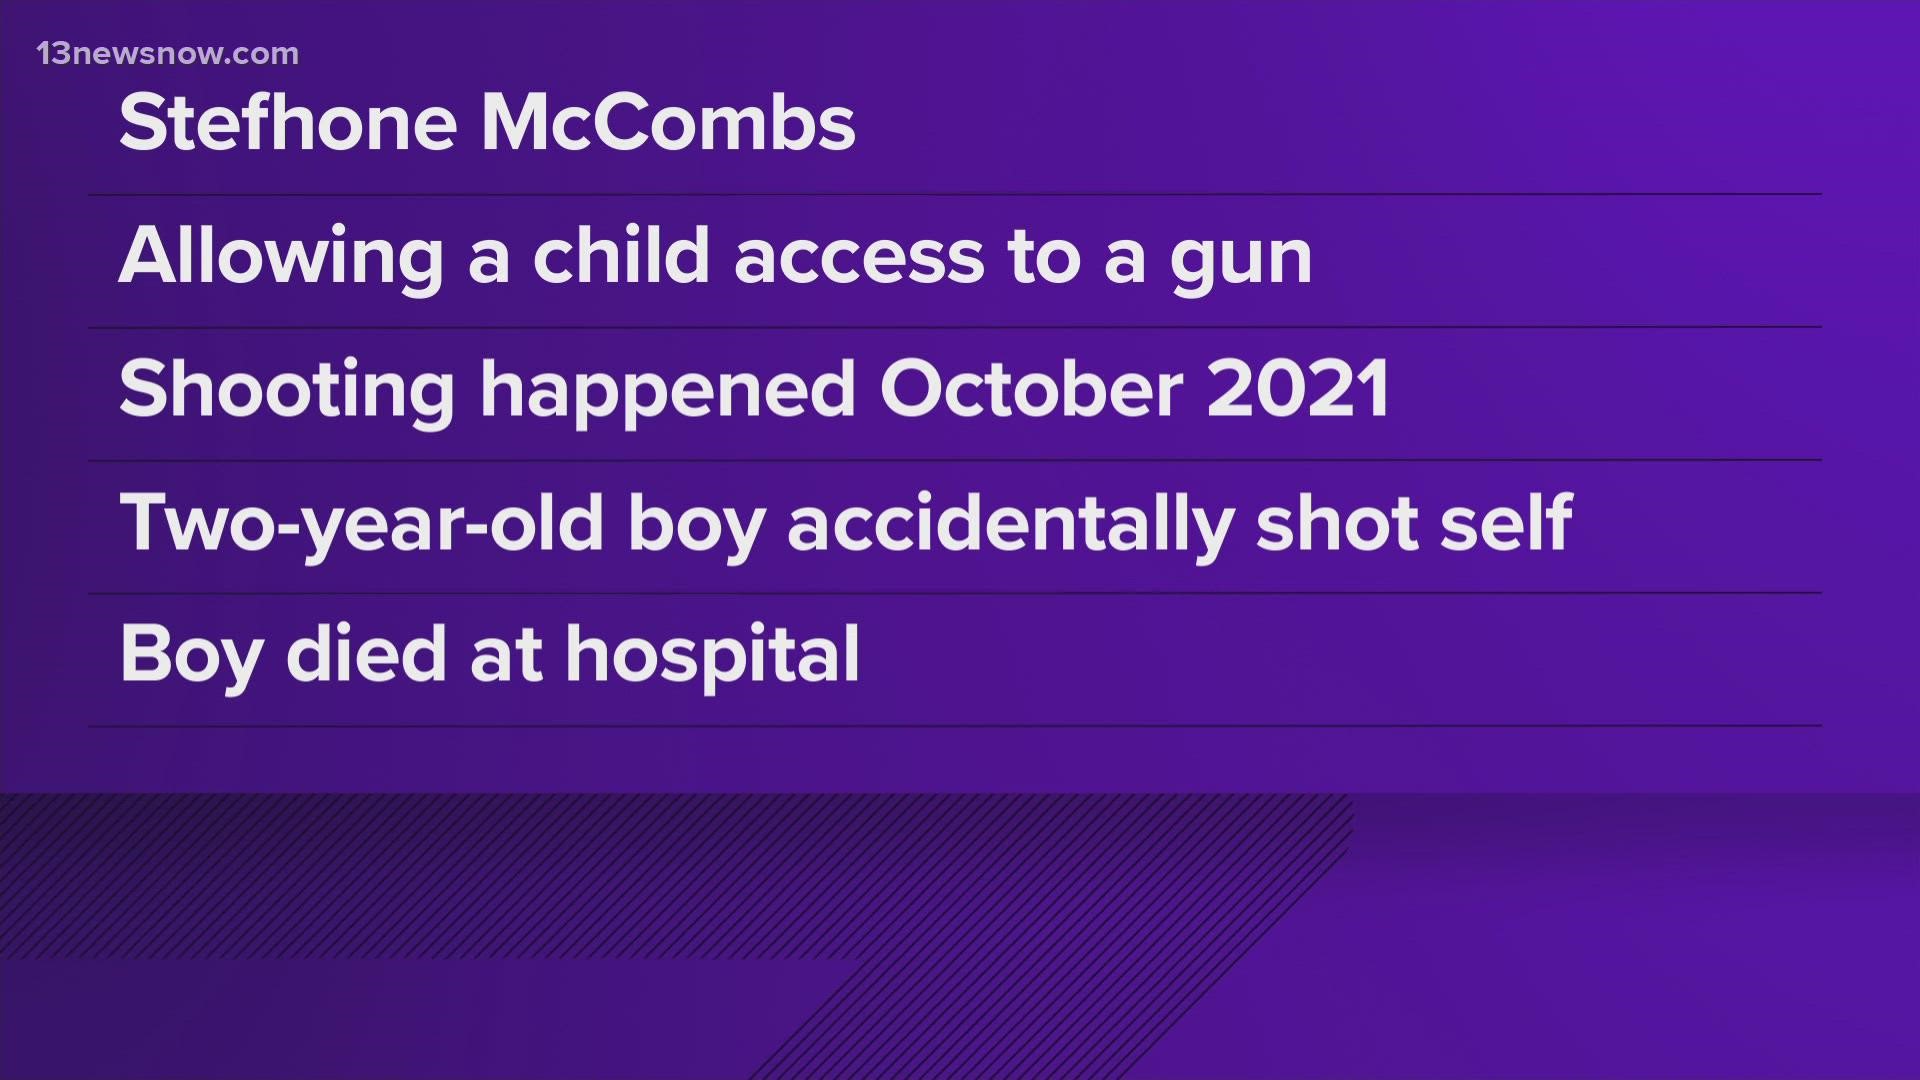 Stefhone McCombs was charged with a misdemeanor charge of allowing access to a firearm by a minor. His 2-year-old son died after shooting himself with a gun in 2021.